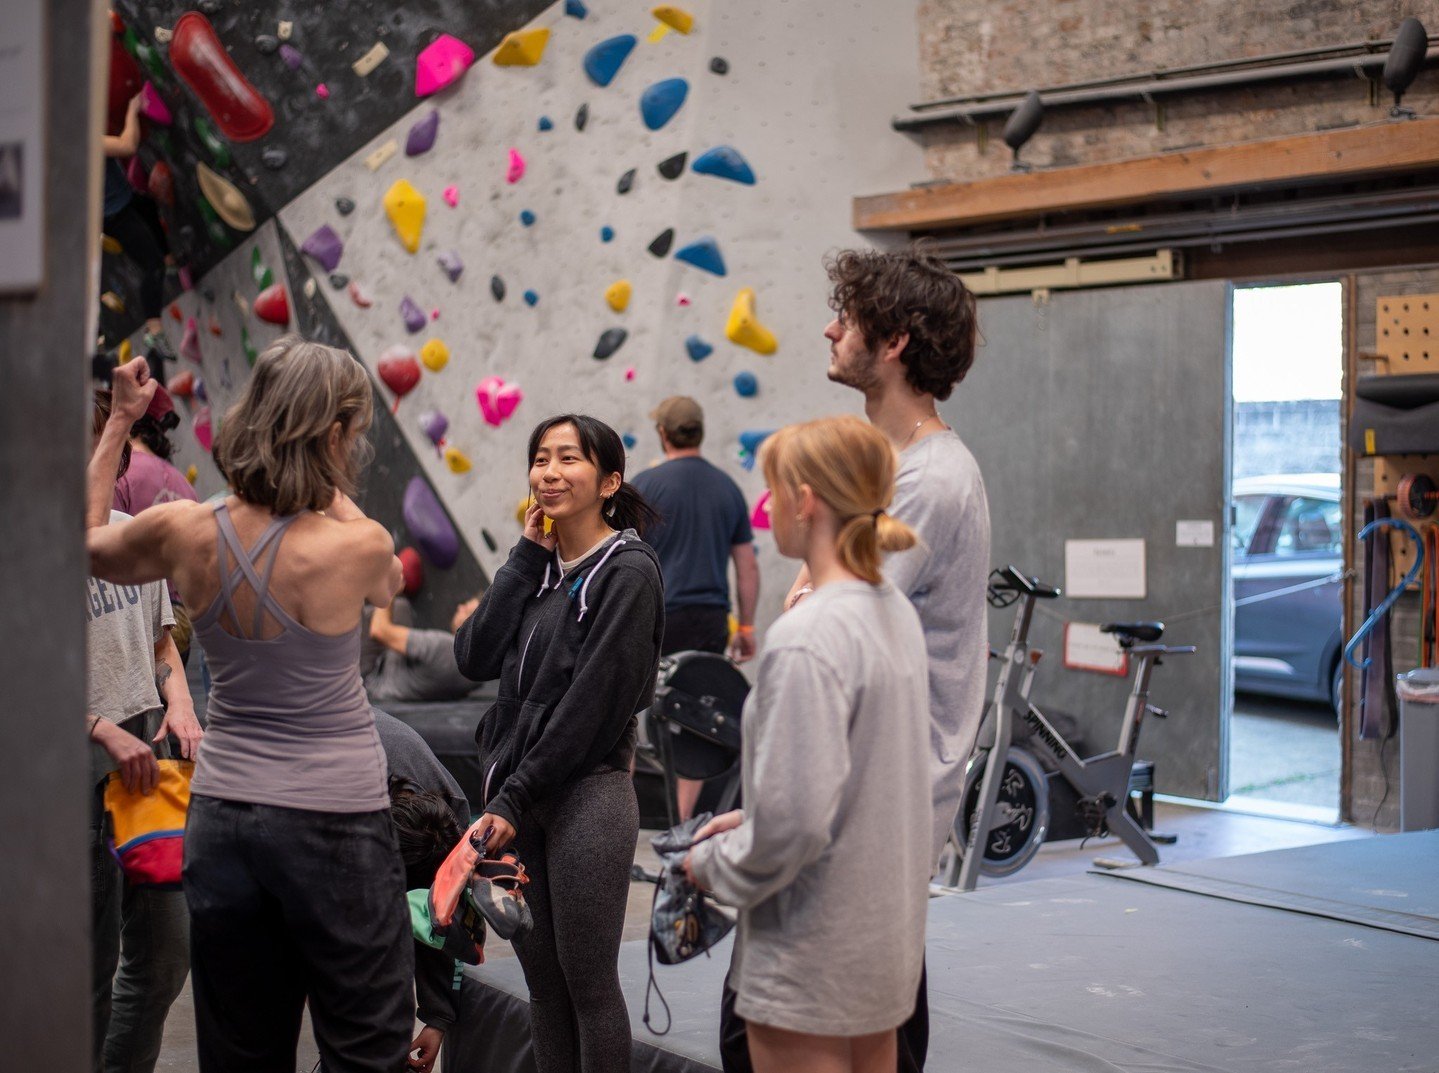 Did you know we offer Bouldering clinics every week?⁠
⁠
If you're just starting out or looking to hone your skills, we've got a clinic for you! Bouldering 101 is offered every Friday from 6:15-7:15pm. On Tuesdays from 6-7pm, we alternate Bouldering 1